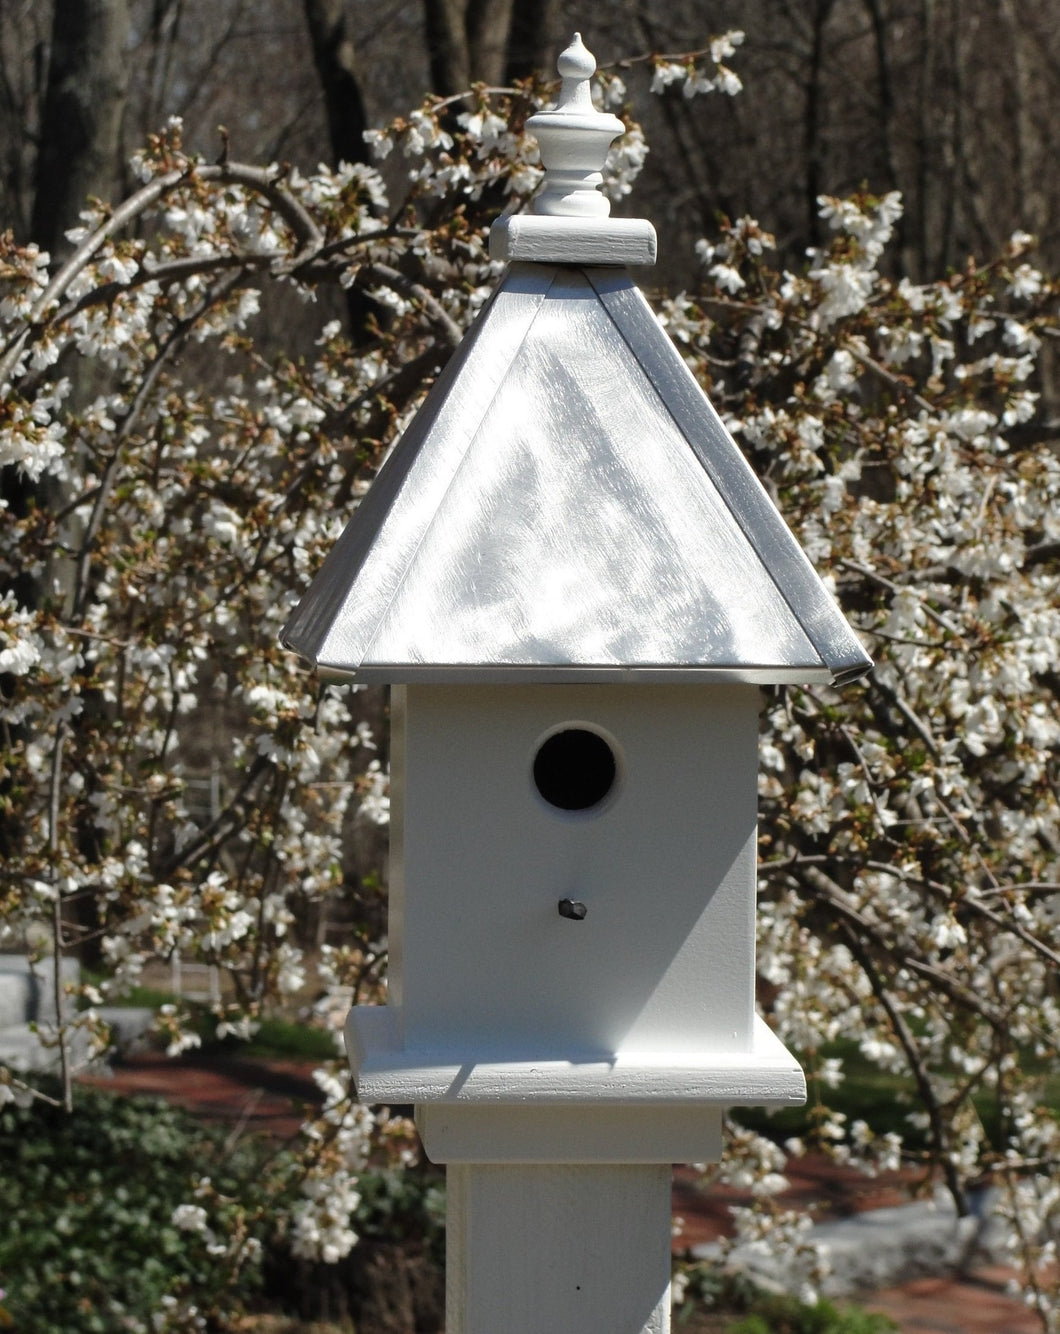 Bird House - 1 Nesting Compartment - Handmade - Wooden - Burnished Aluminum Roof - Weather Resistant - Birdhouse Outdoor - Post Not Included